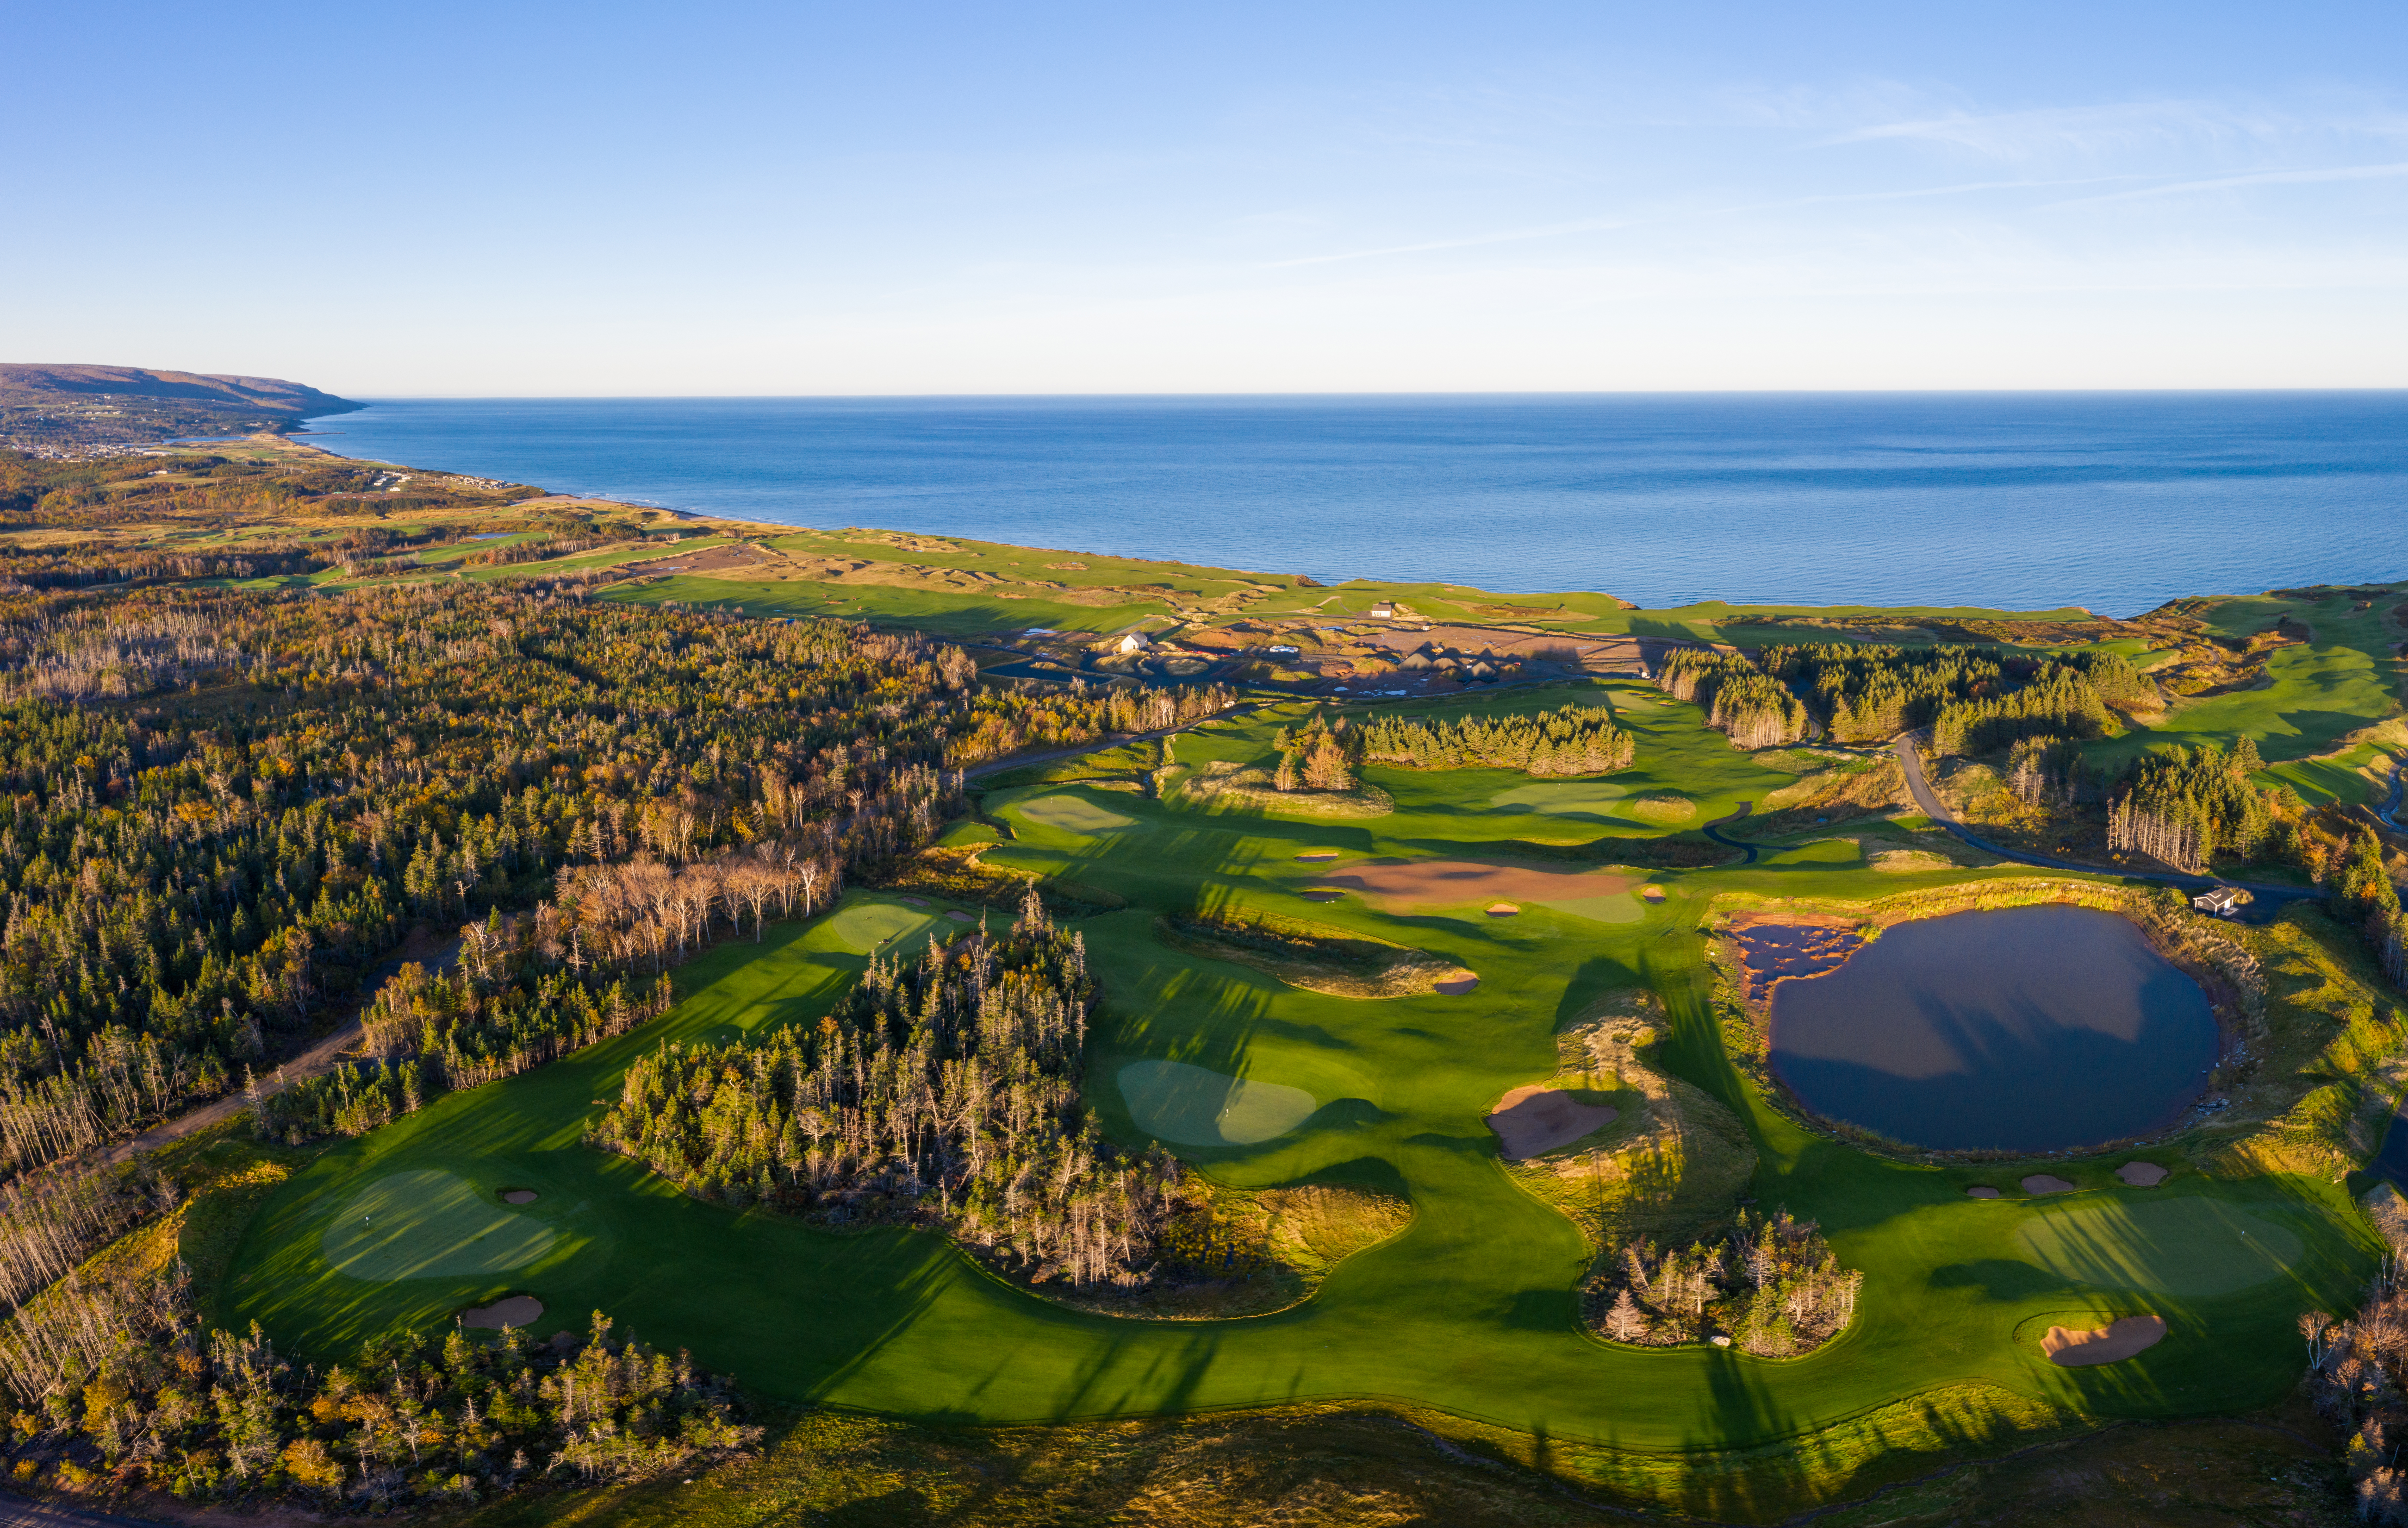 Whitman's latest projects include The Nest at Cabot Cape Breton in Nova Scotia. (Rob Romard/Cabot)